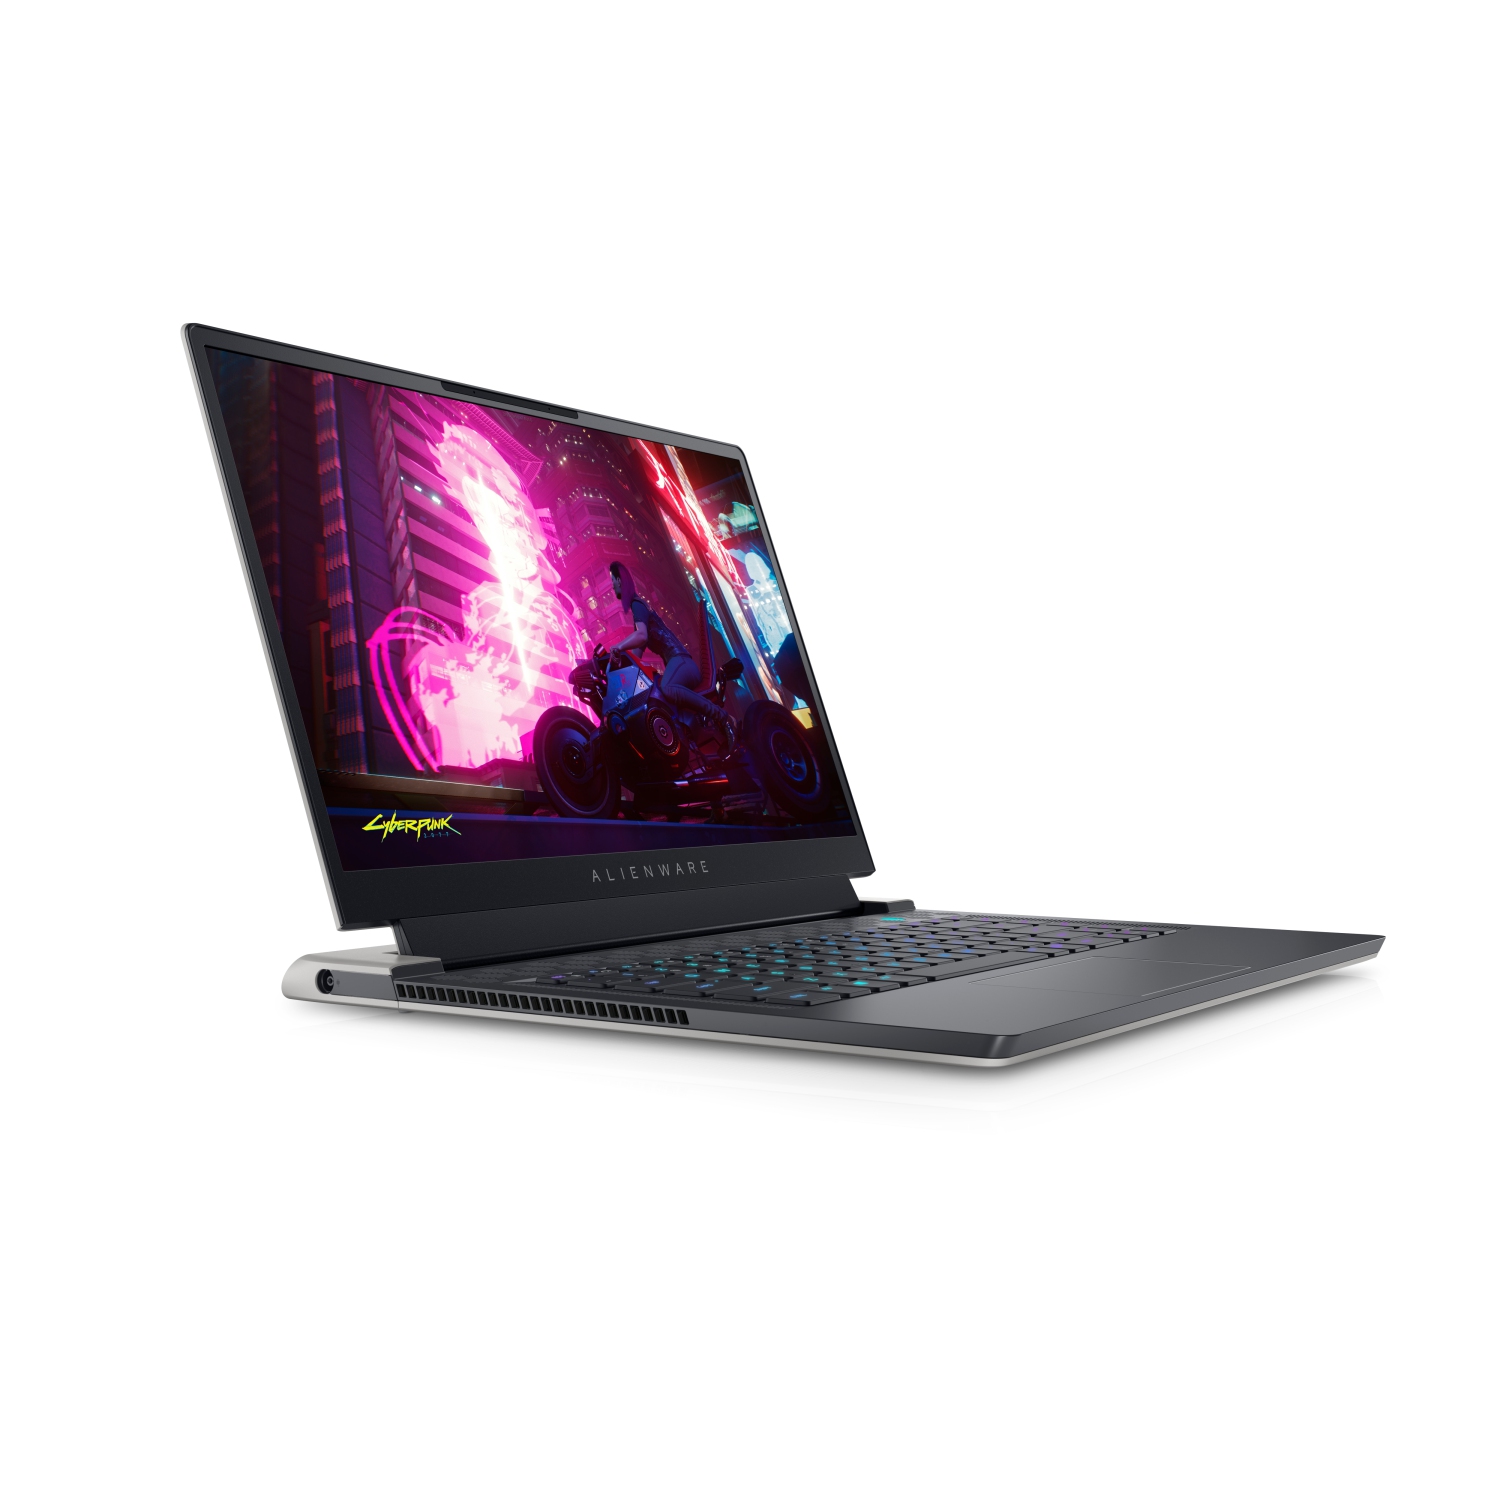 Refurbished (Excellent) - Dell Alienware X15 R1 Gaming Laptop (2021), 15.6" QHD, Core i7 - 256GB SSD + 256GB SSD - 32GB RAM - RTX 3070, 4.6 GHz - 11th Gen CPU Certified